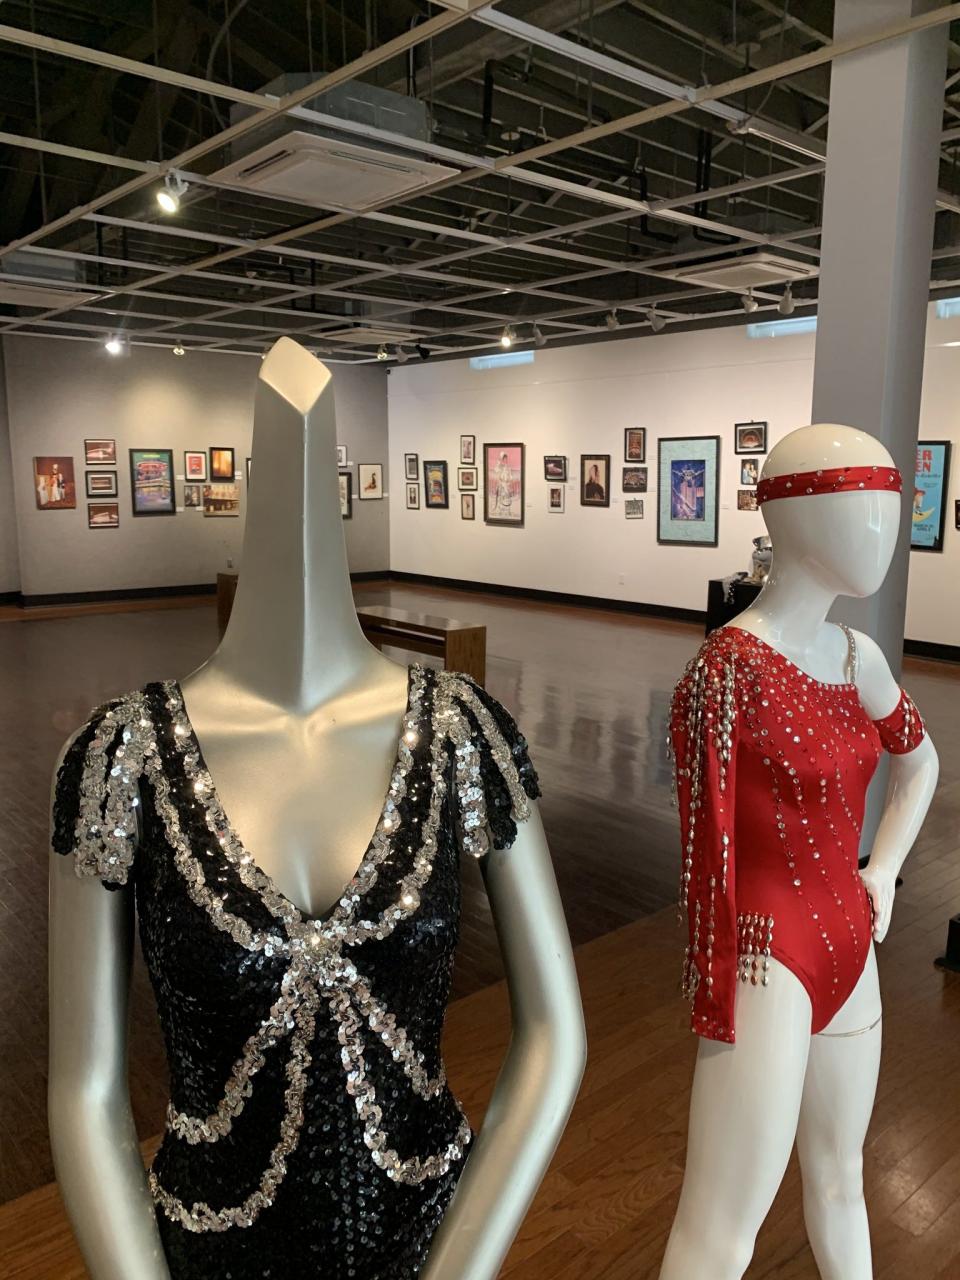 "Life as a Rockette" exhibit on display at the Panama City Center for the Arts through Feb. 4